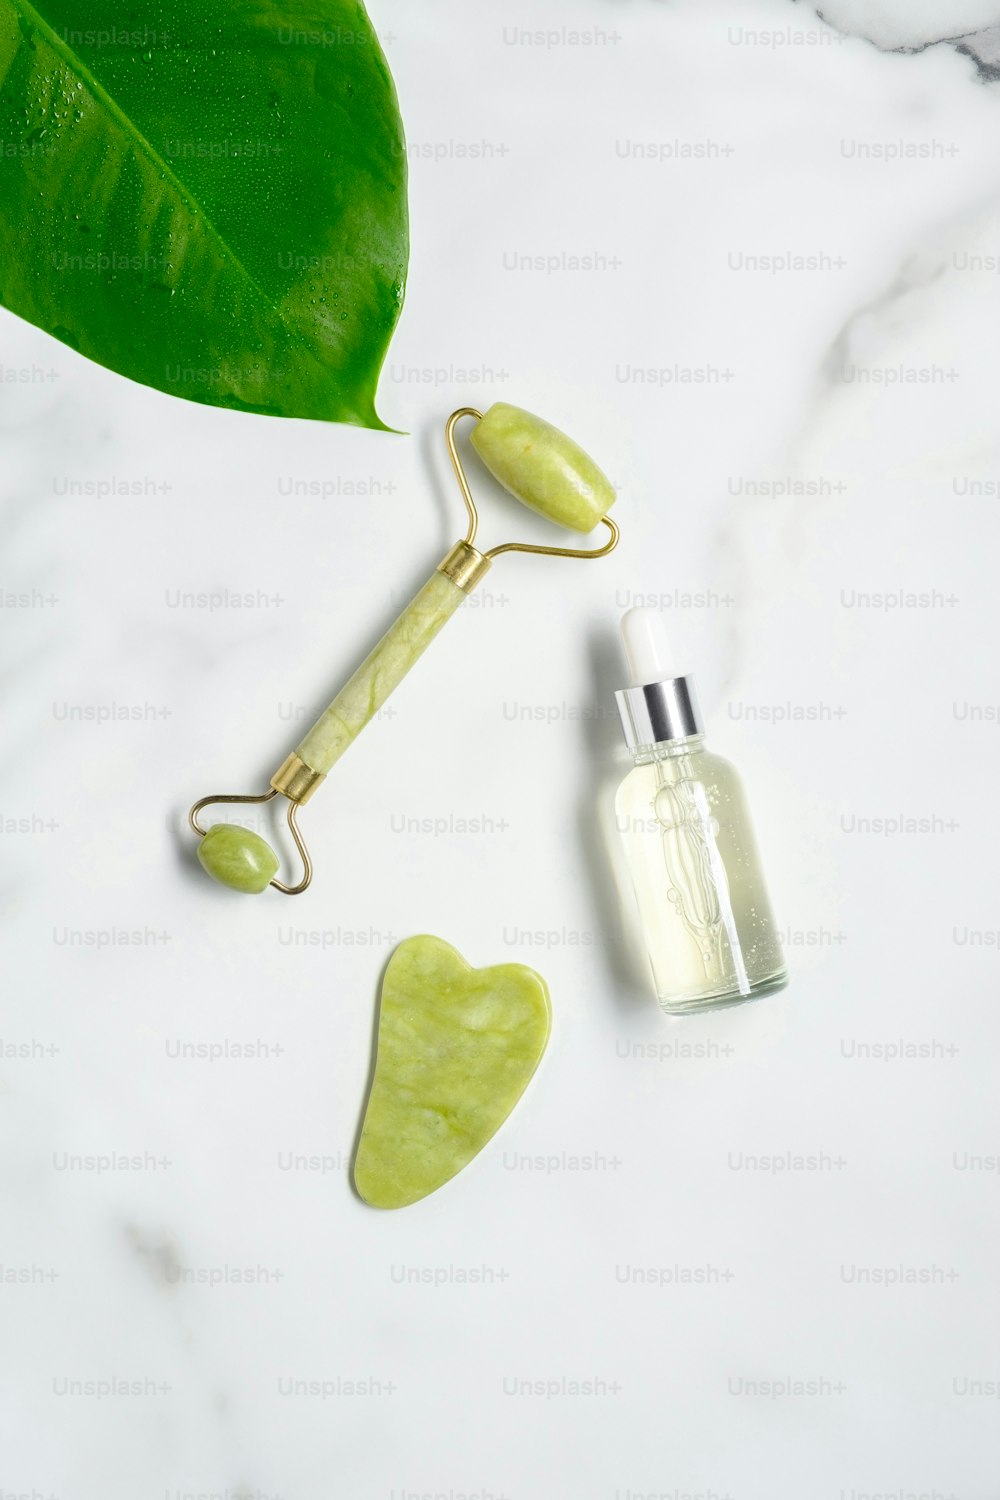 Jade roller with natural anti aging jade stone, essential oil dropper bottle and green leaf on marble table. Facial skin care concept. Flat lay, top view.